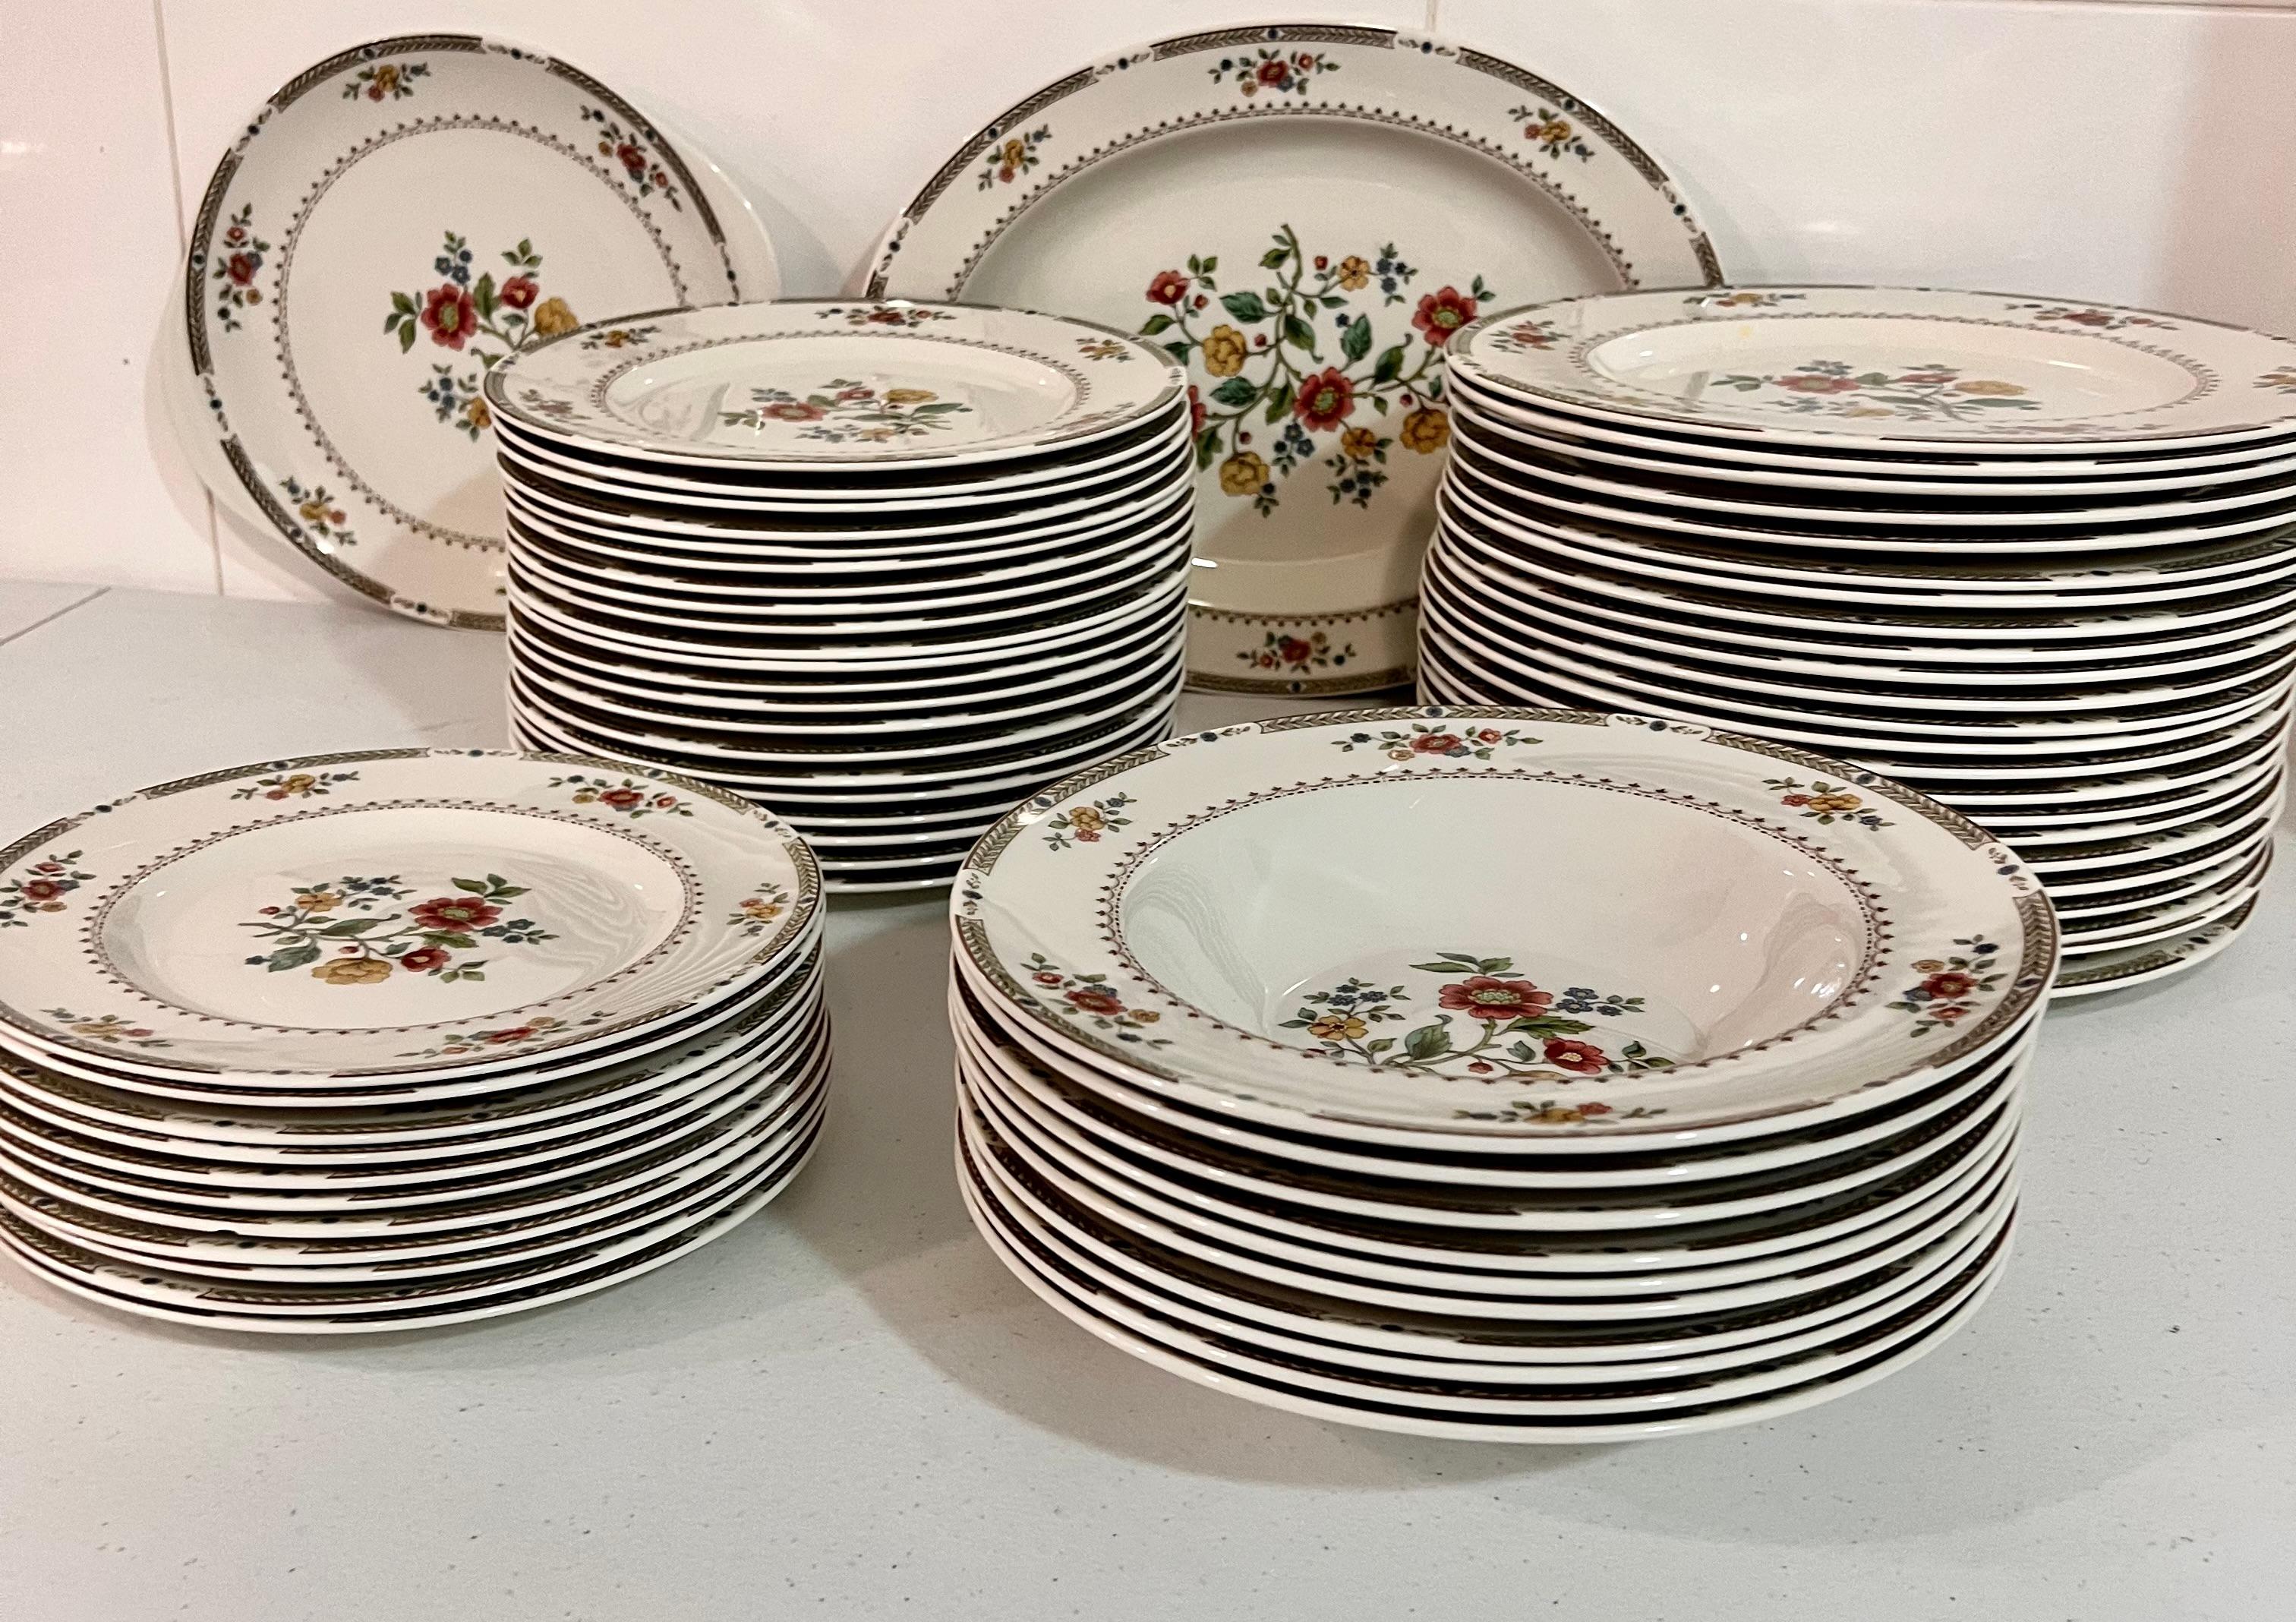 Creamer replacement flatware & dinnerware kingswood by Royal Doulton

Height: 5 in
Special Characteristics: 10 OZ FTD SHER
Hand Wash

Request info for flatware and diner ware 
We sell them individually or in sets
We have a full collection